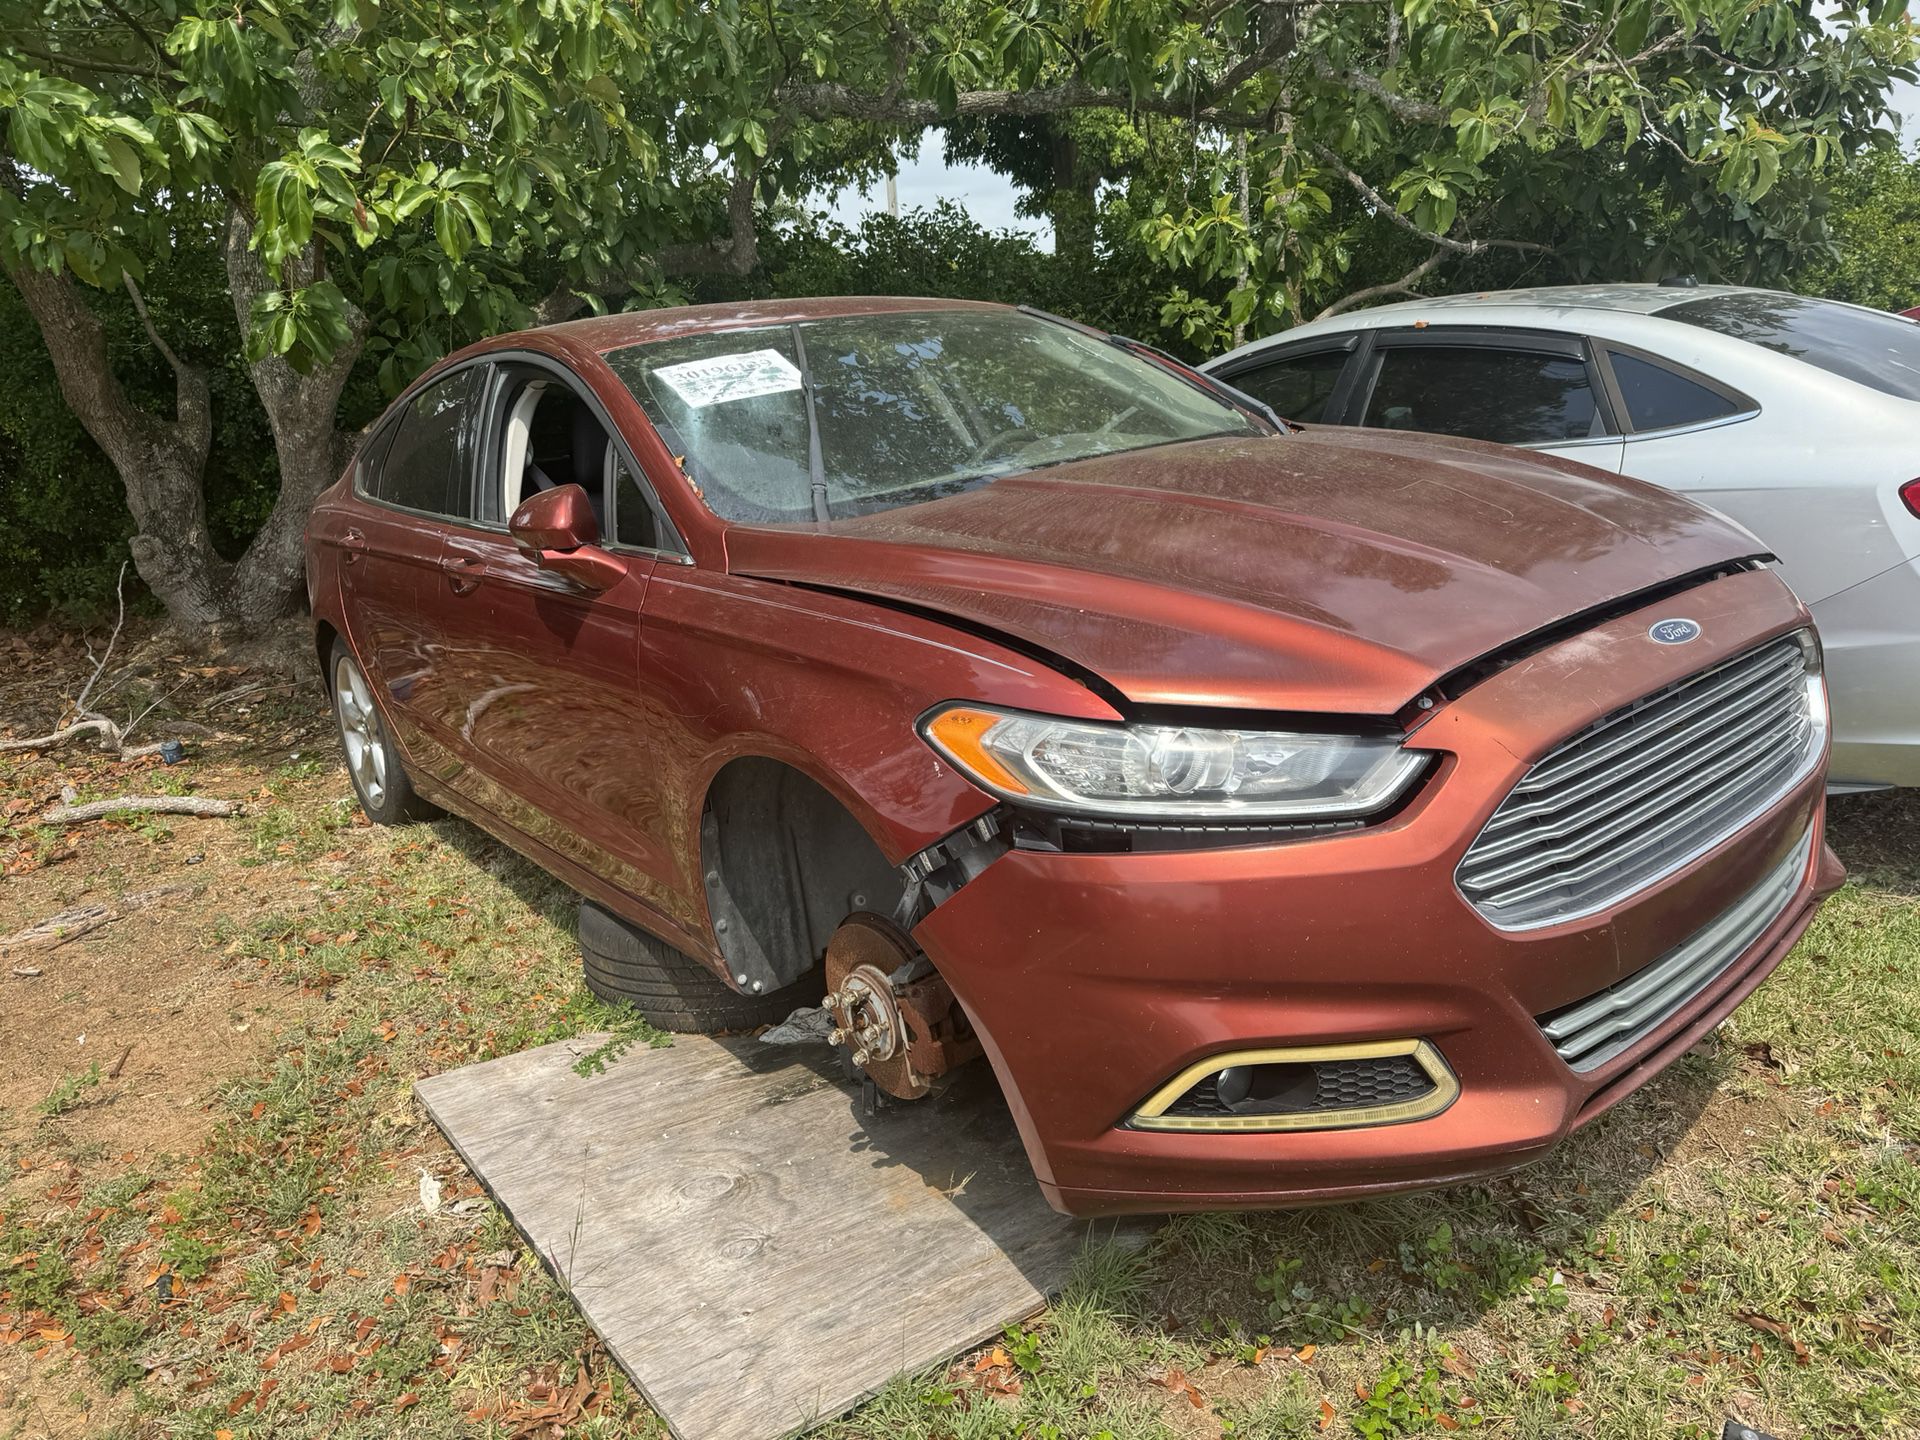 2016 Ford Fusion Part